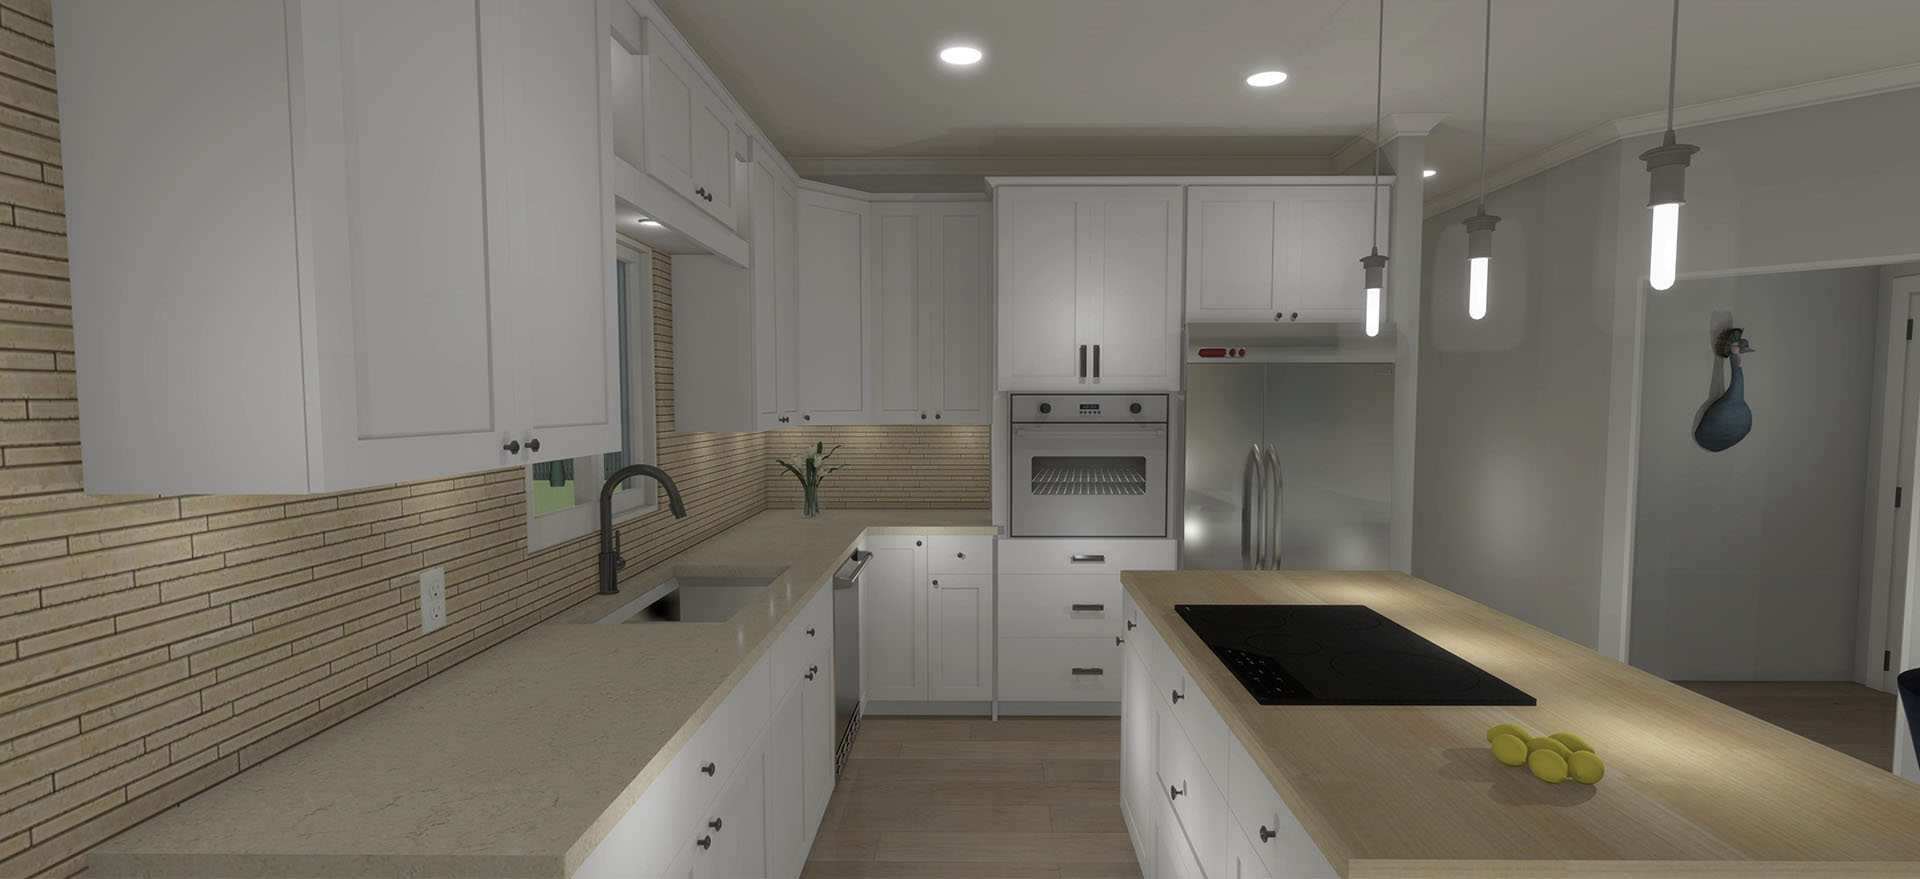 White kitchen cabinets with light colored wood